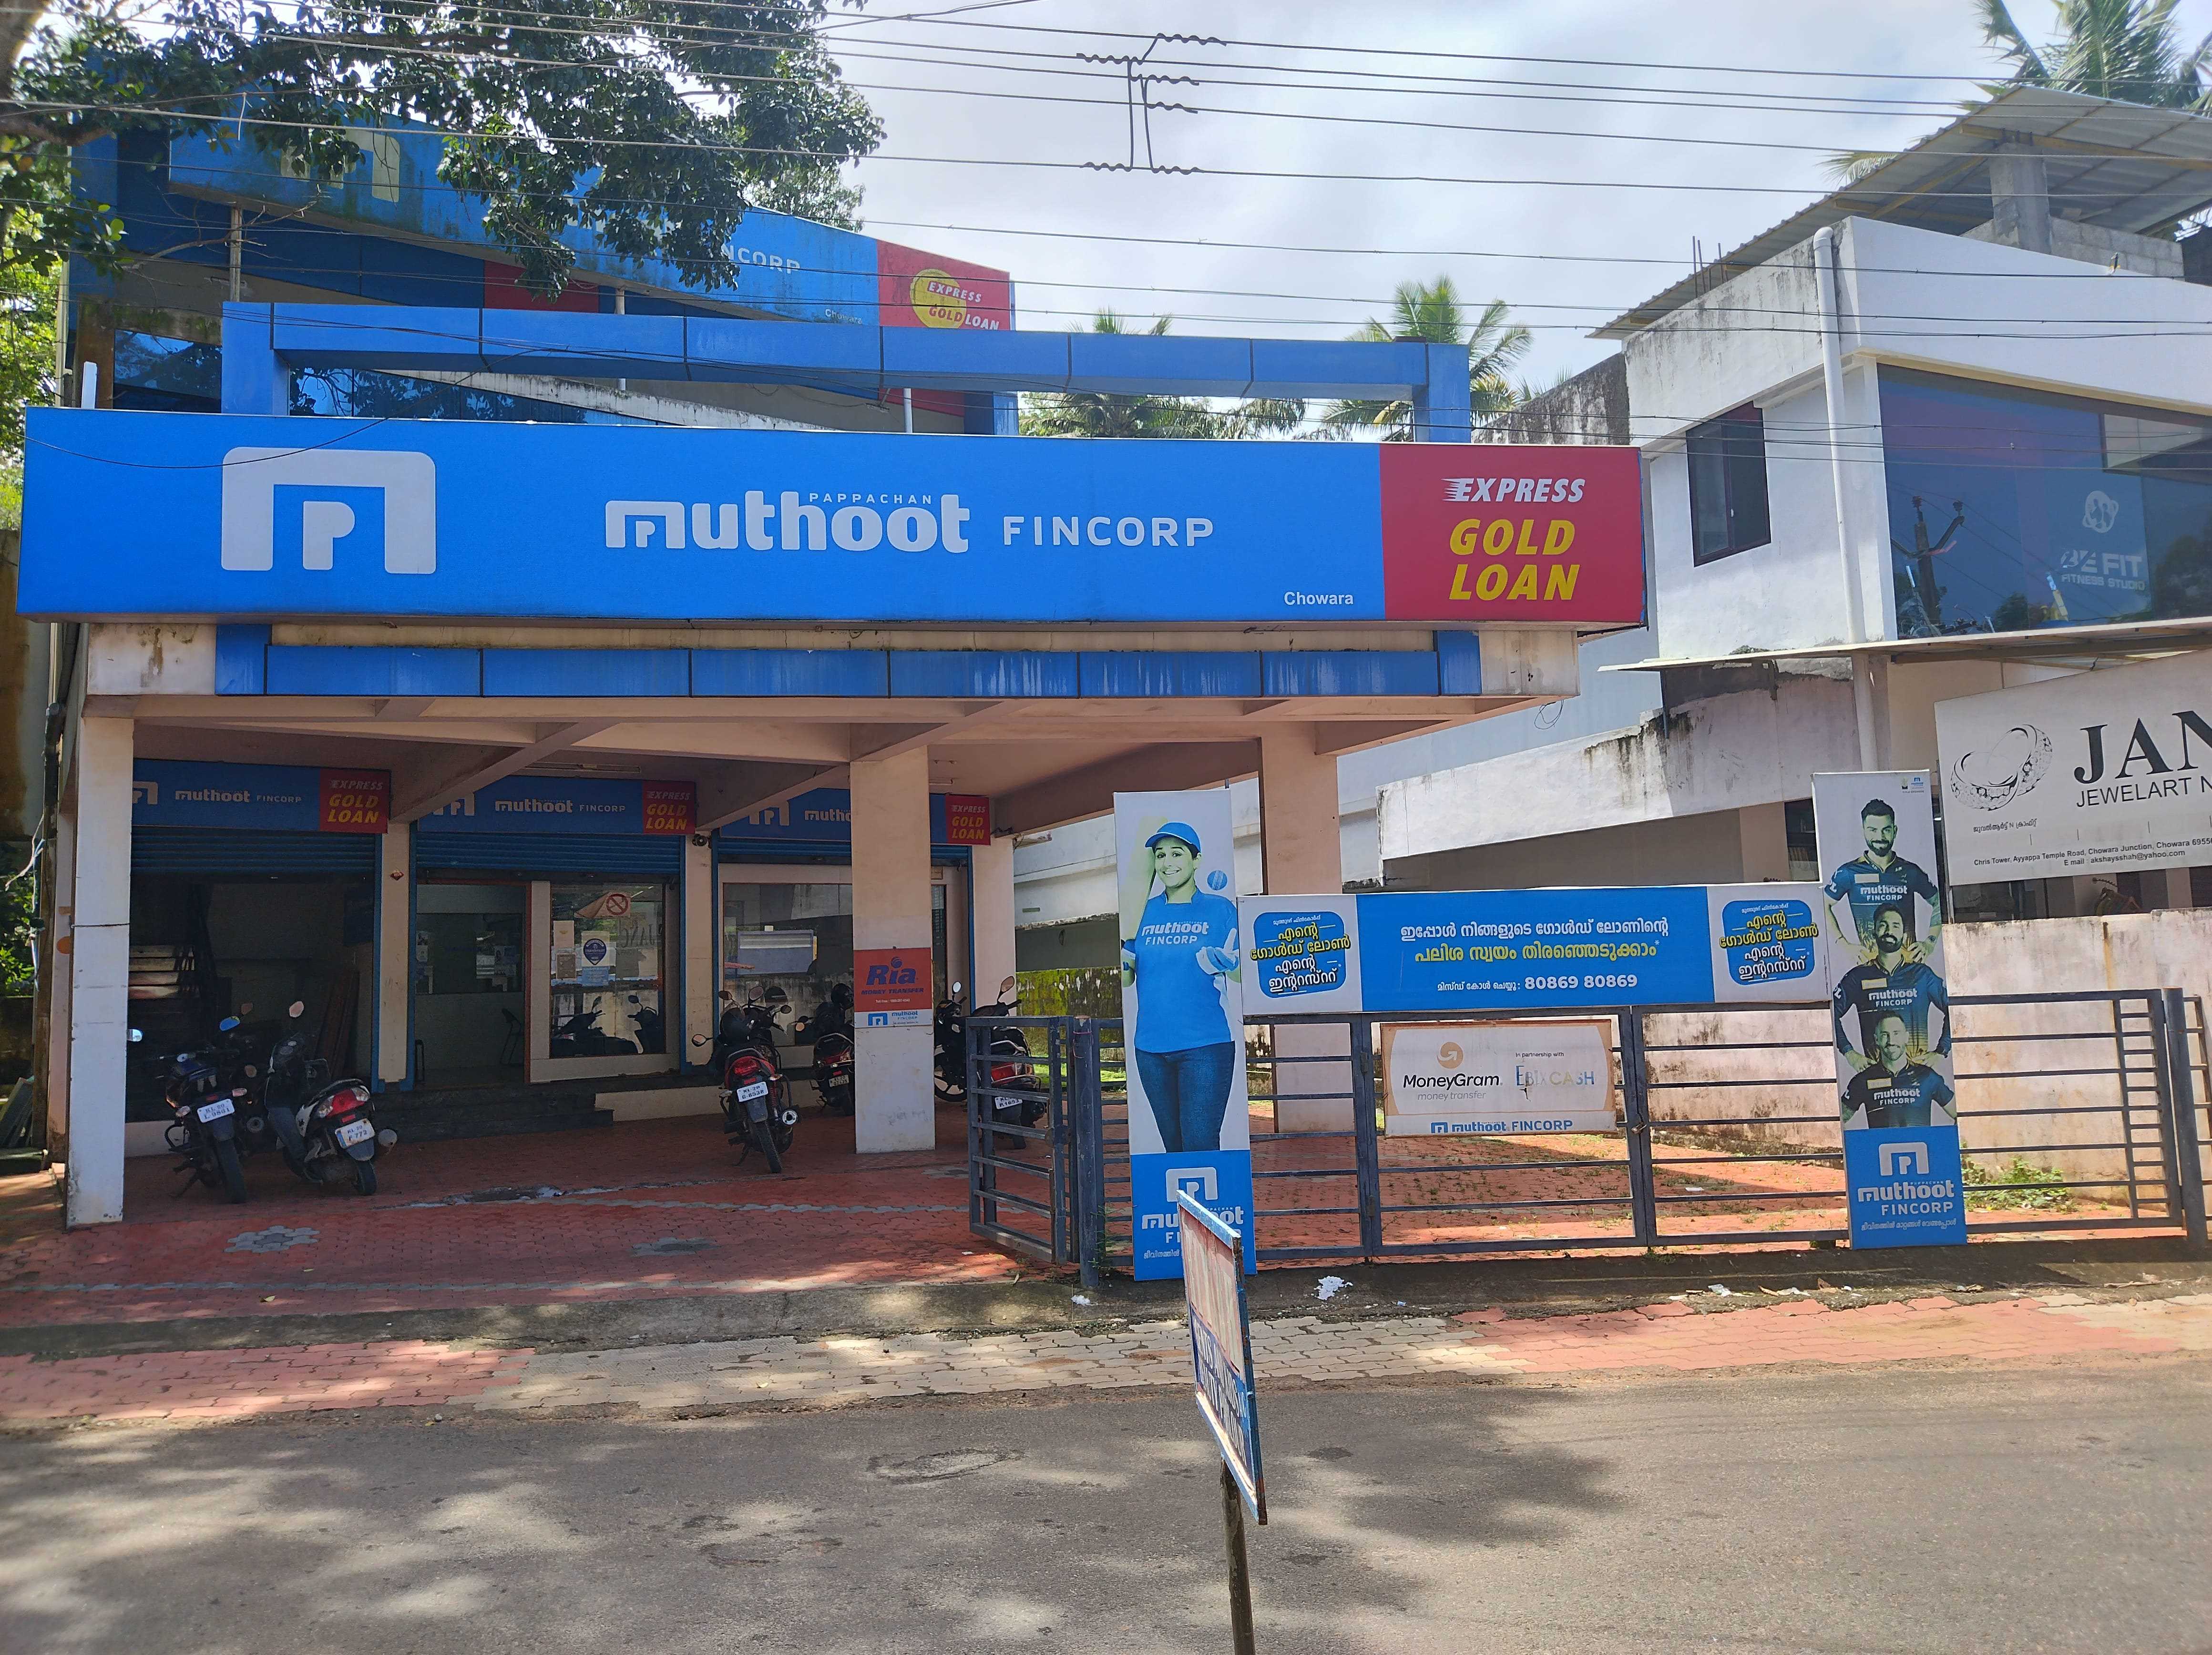 Photos and Videos of Muthoot Fincorp Gold Loan in Chowara, Thiruvananthapuram